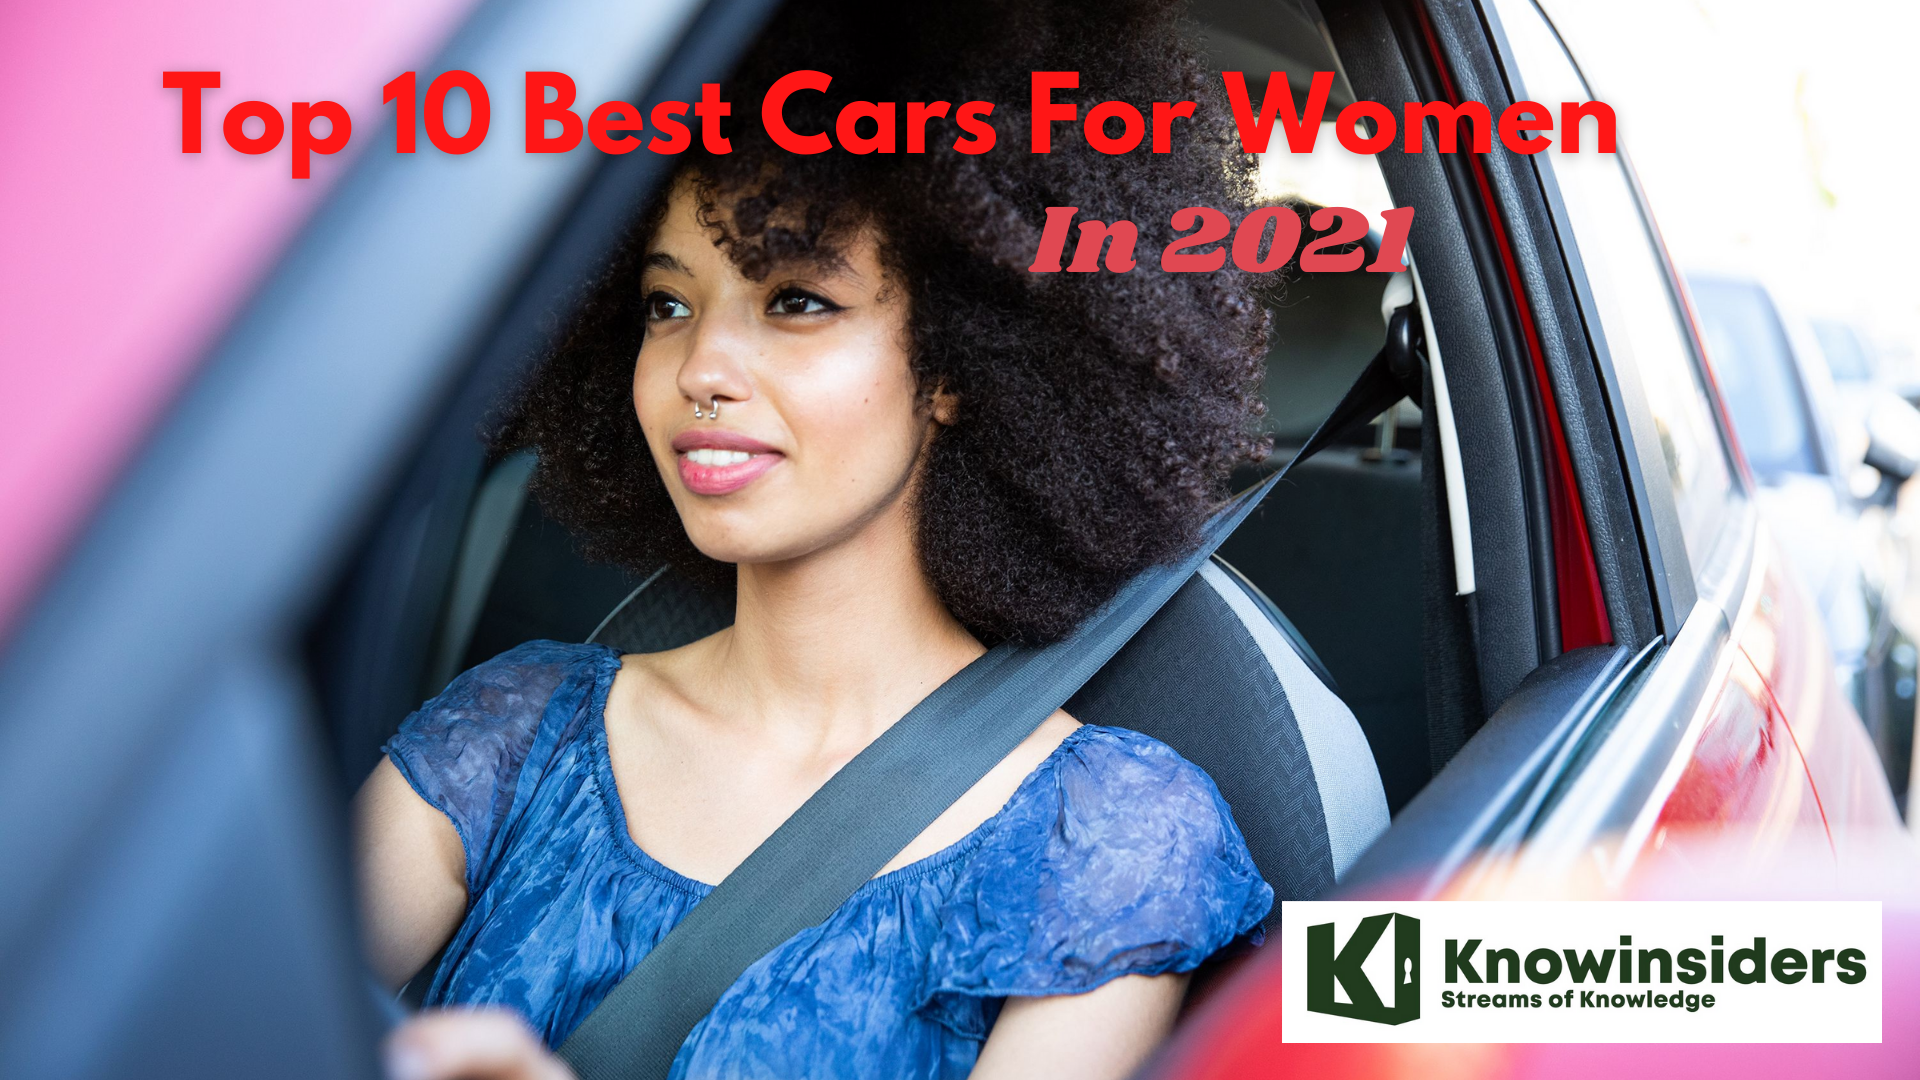 Top 10 Best Cars For Women in 2021/2022